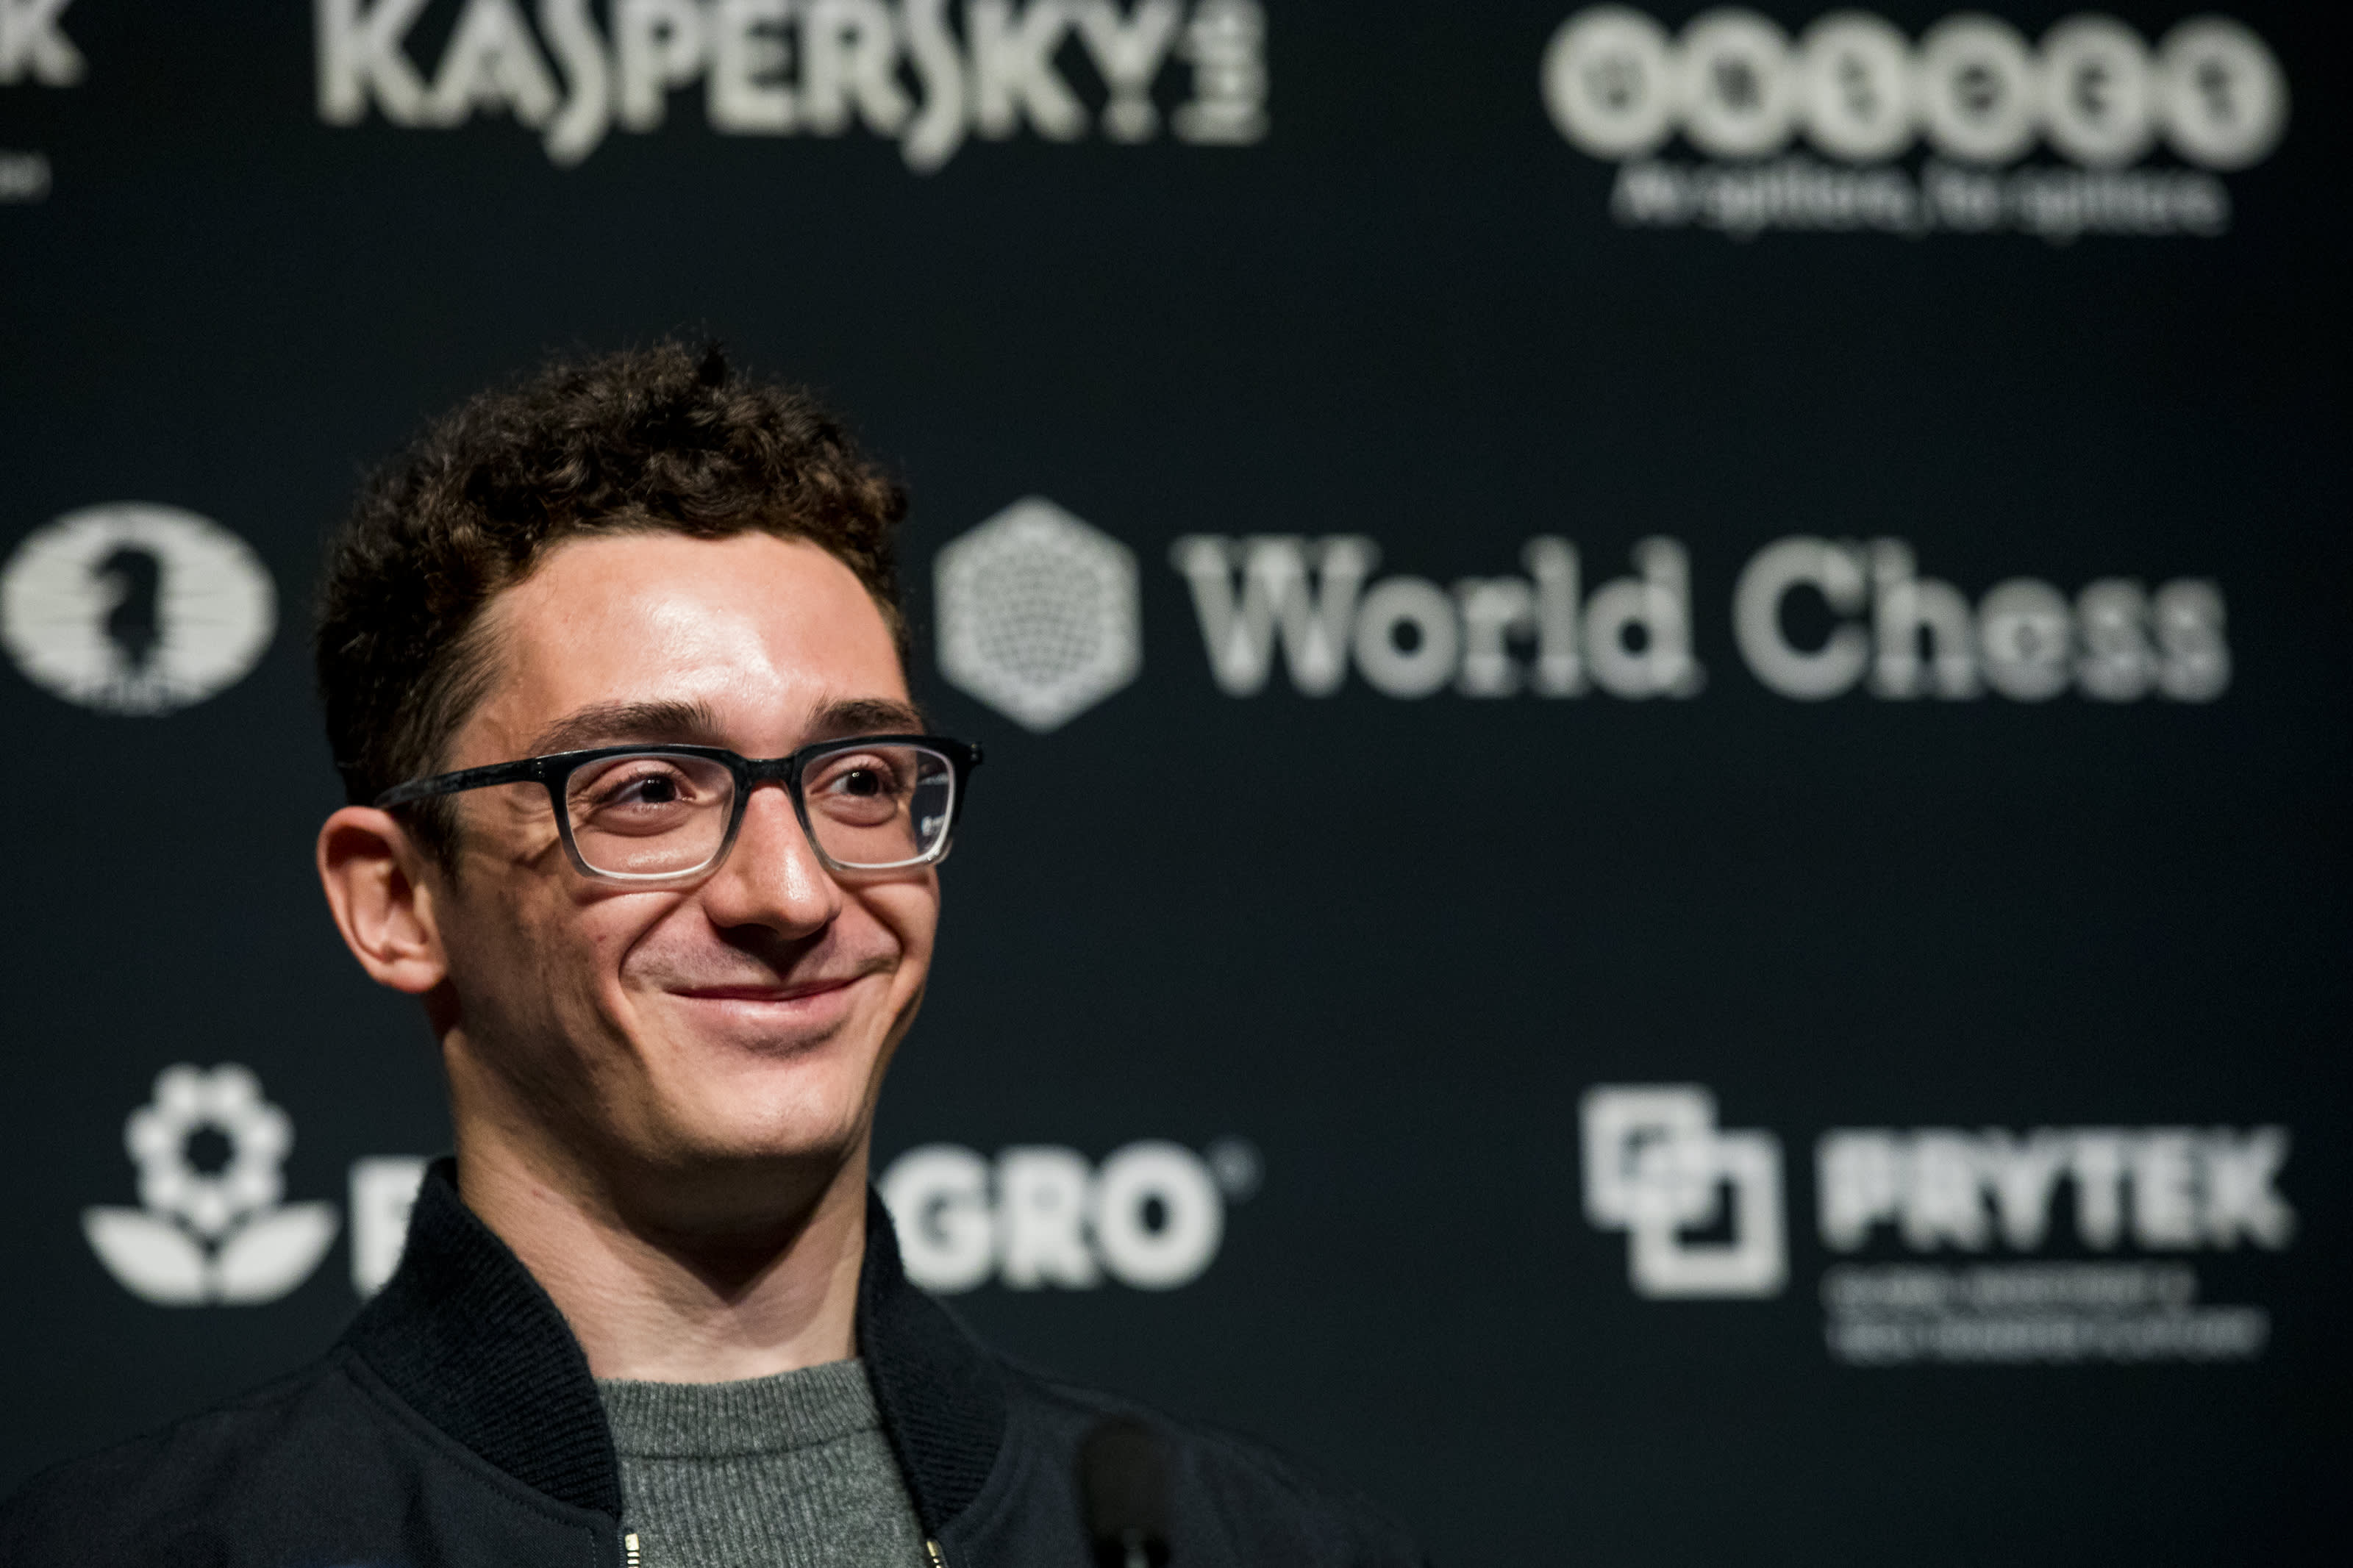 Caruana's new website. He looks like the 2nd highest player in the world. :  r/chess